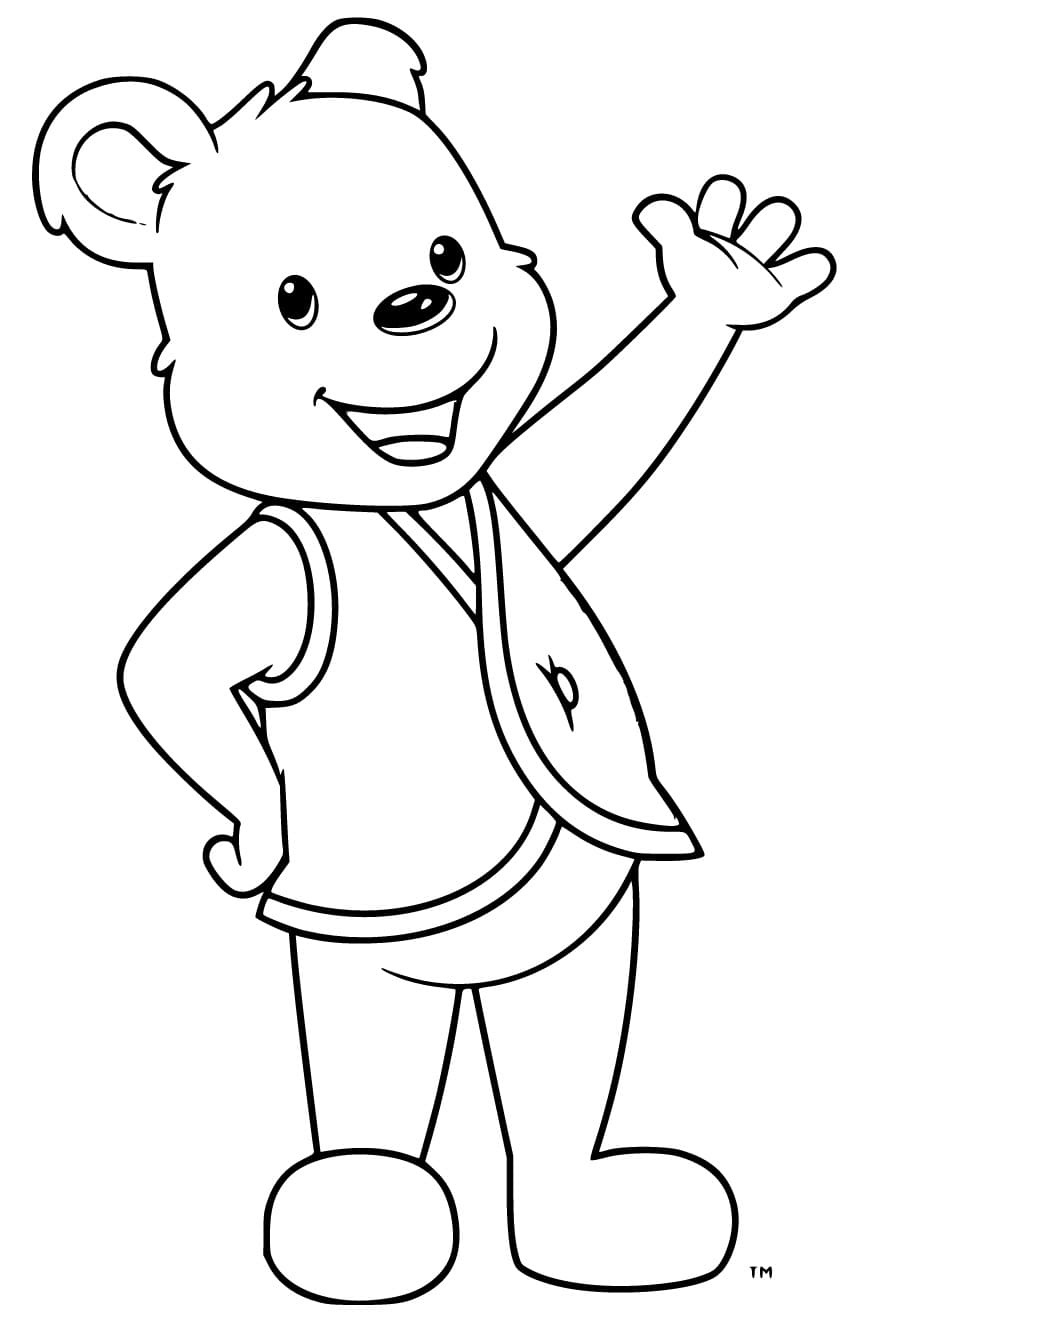 Awana Cubbies coloring page - Download, Print or Color Online for Free